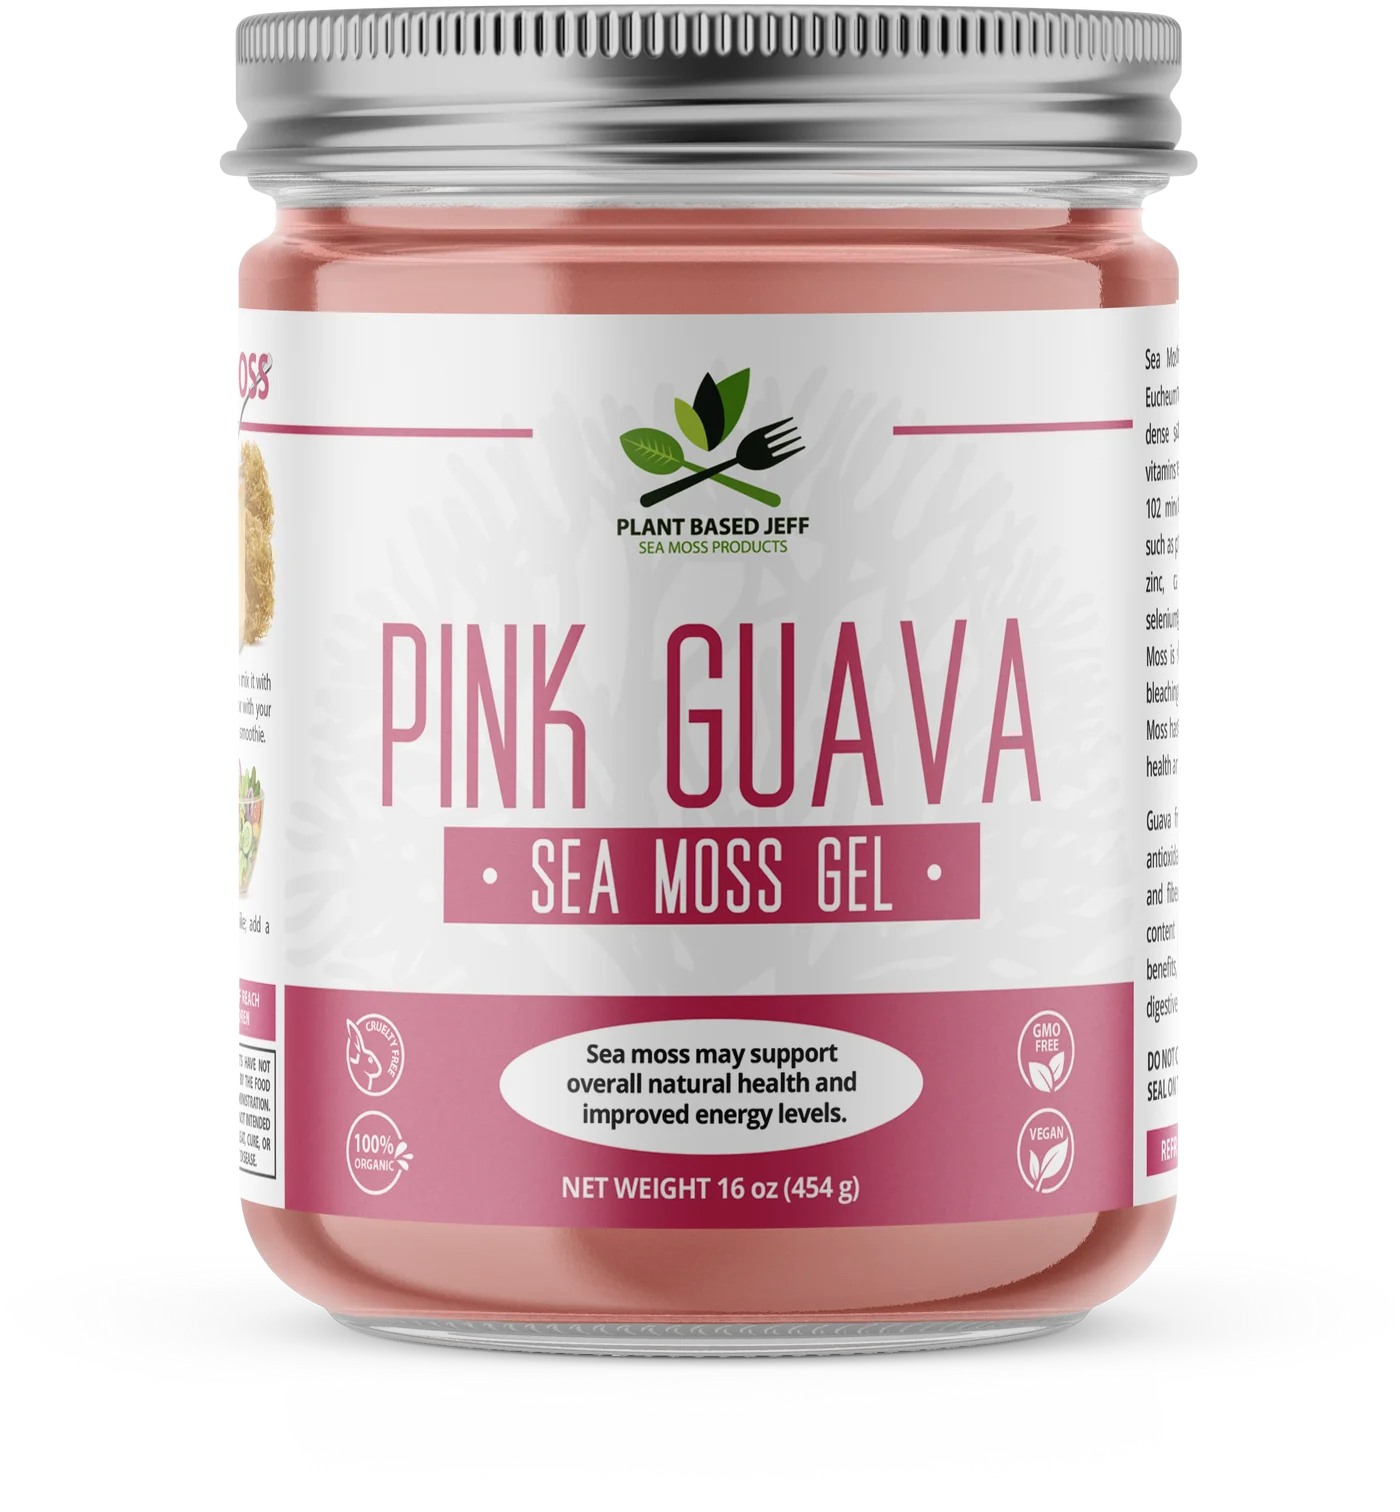 buy pink guava sea moss gel to help regulate metabolism, reduce stress and improve brain health